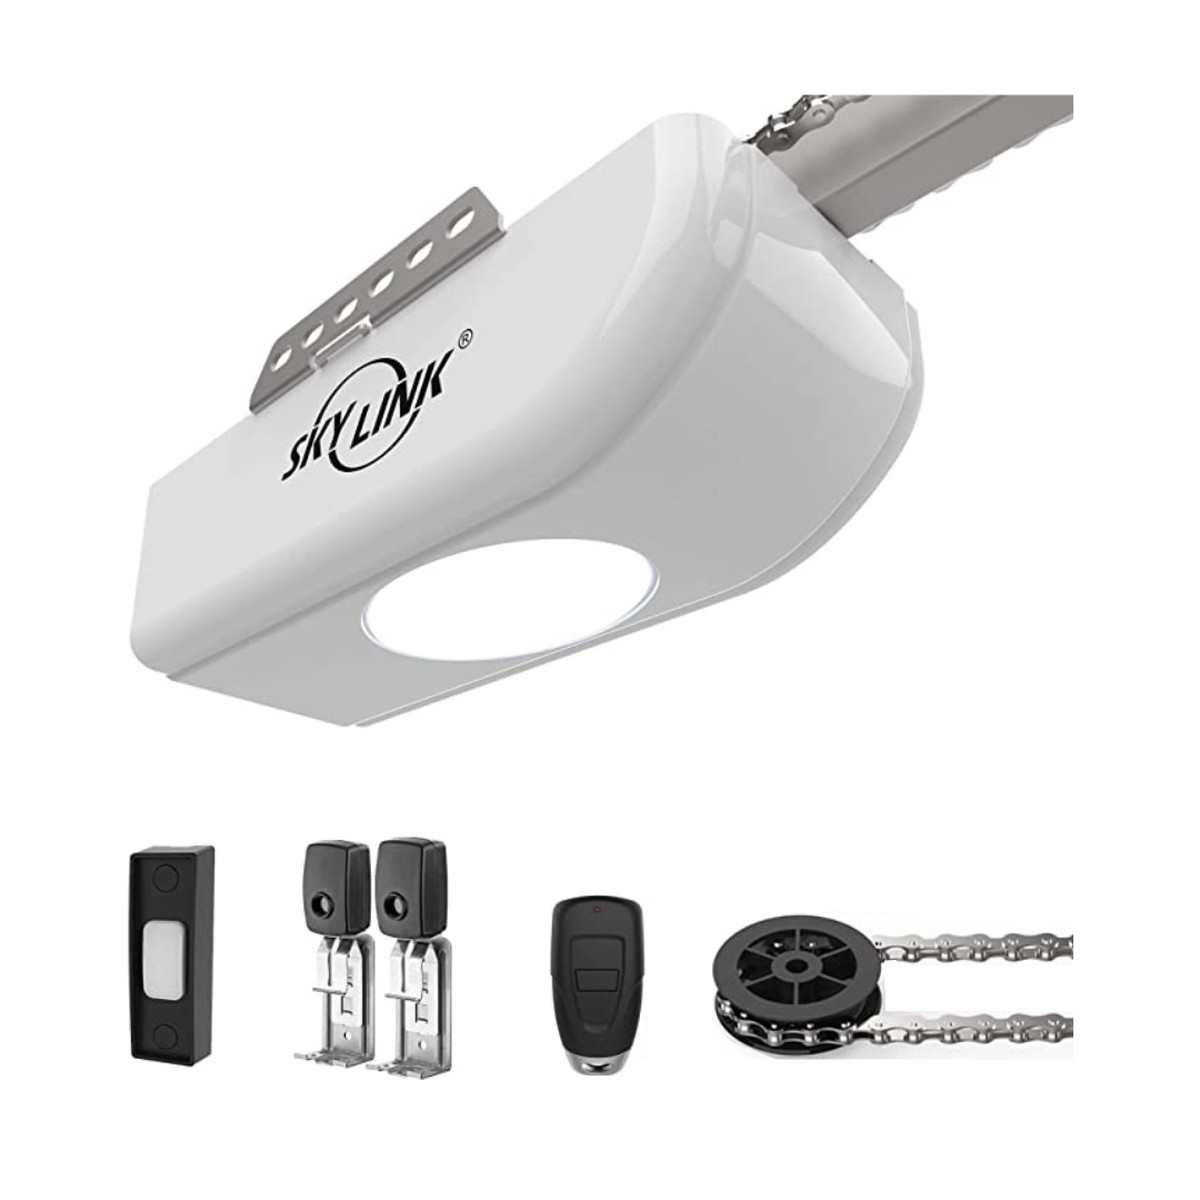 Skylink garage door opener with a white cover that clips onto the tracks for garage door and has a sensor.